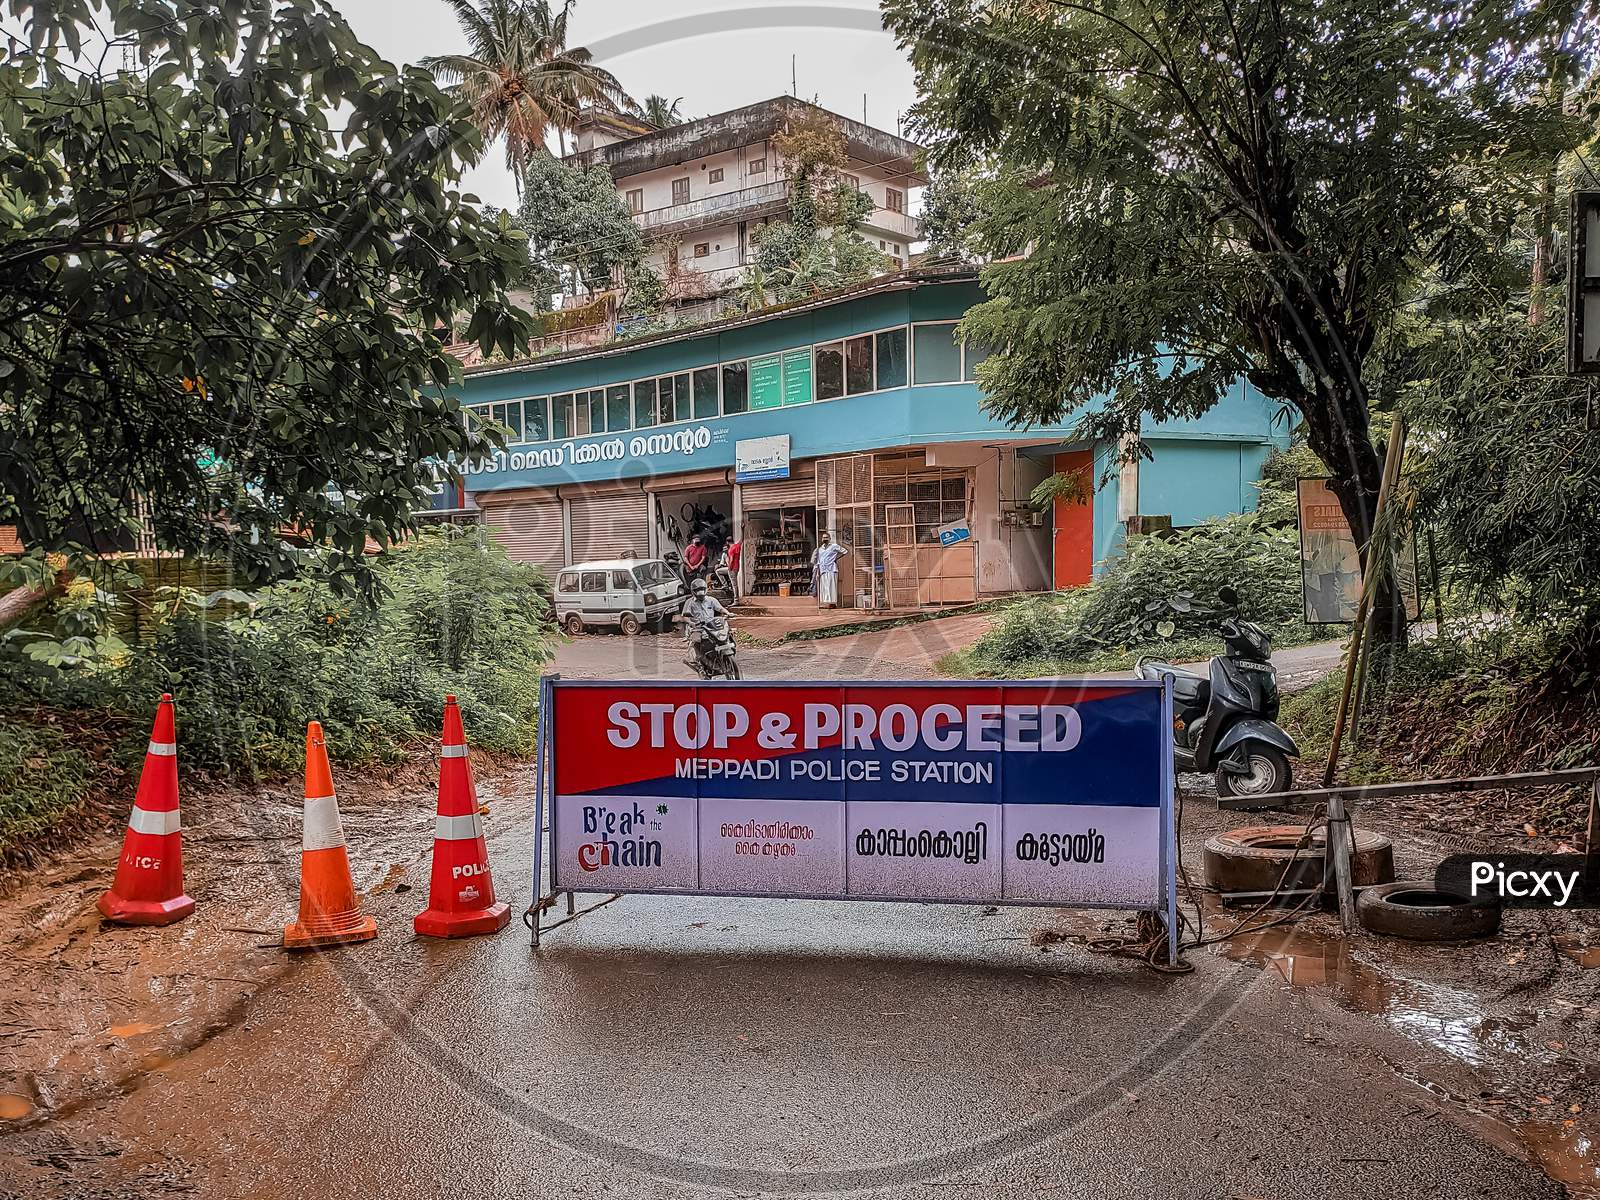 Meppadi, Kerala / India - 09.14.2020 : Road Blocked By Police In Containment Zone After A Person Was Tested Positive For Corona Virus. Covid-19 Pandemic.